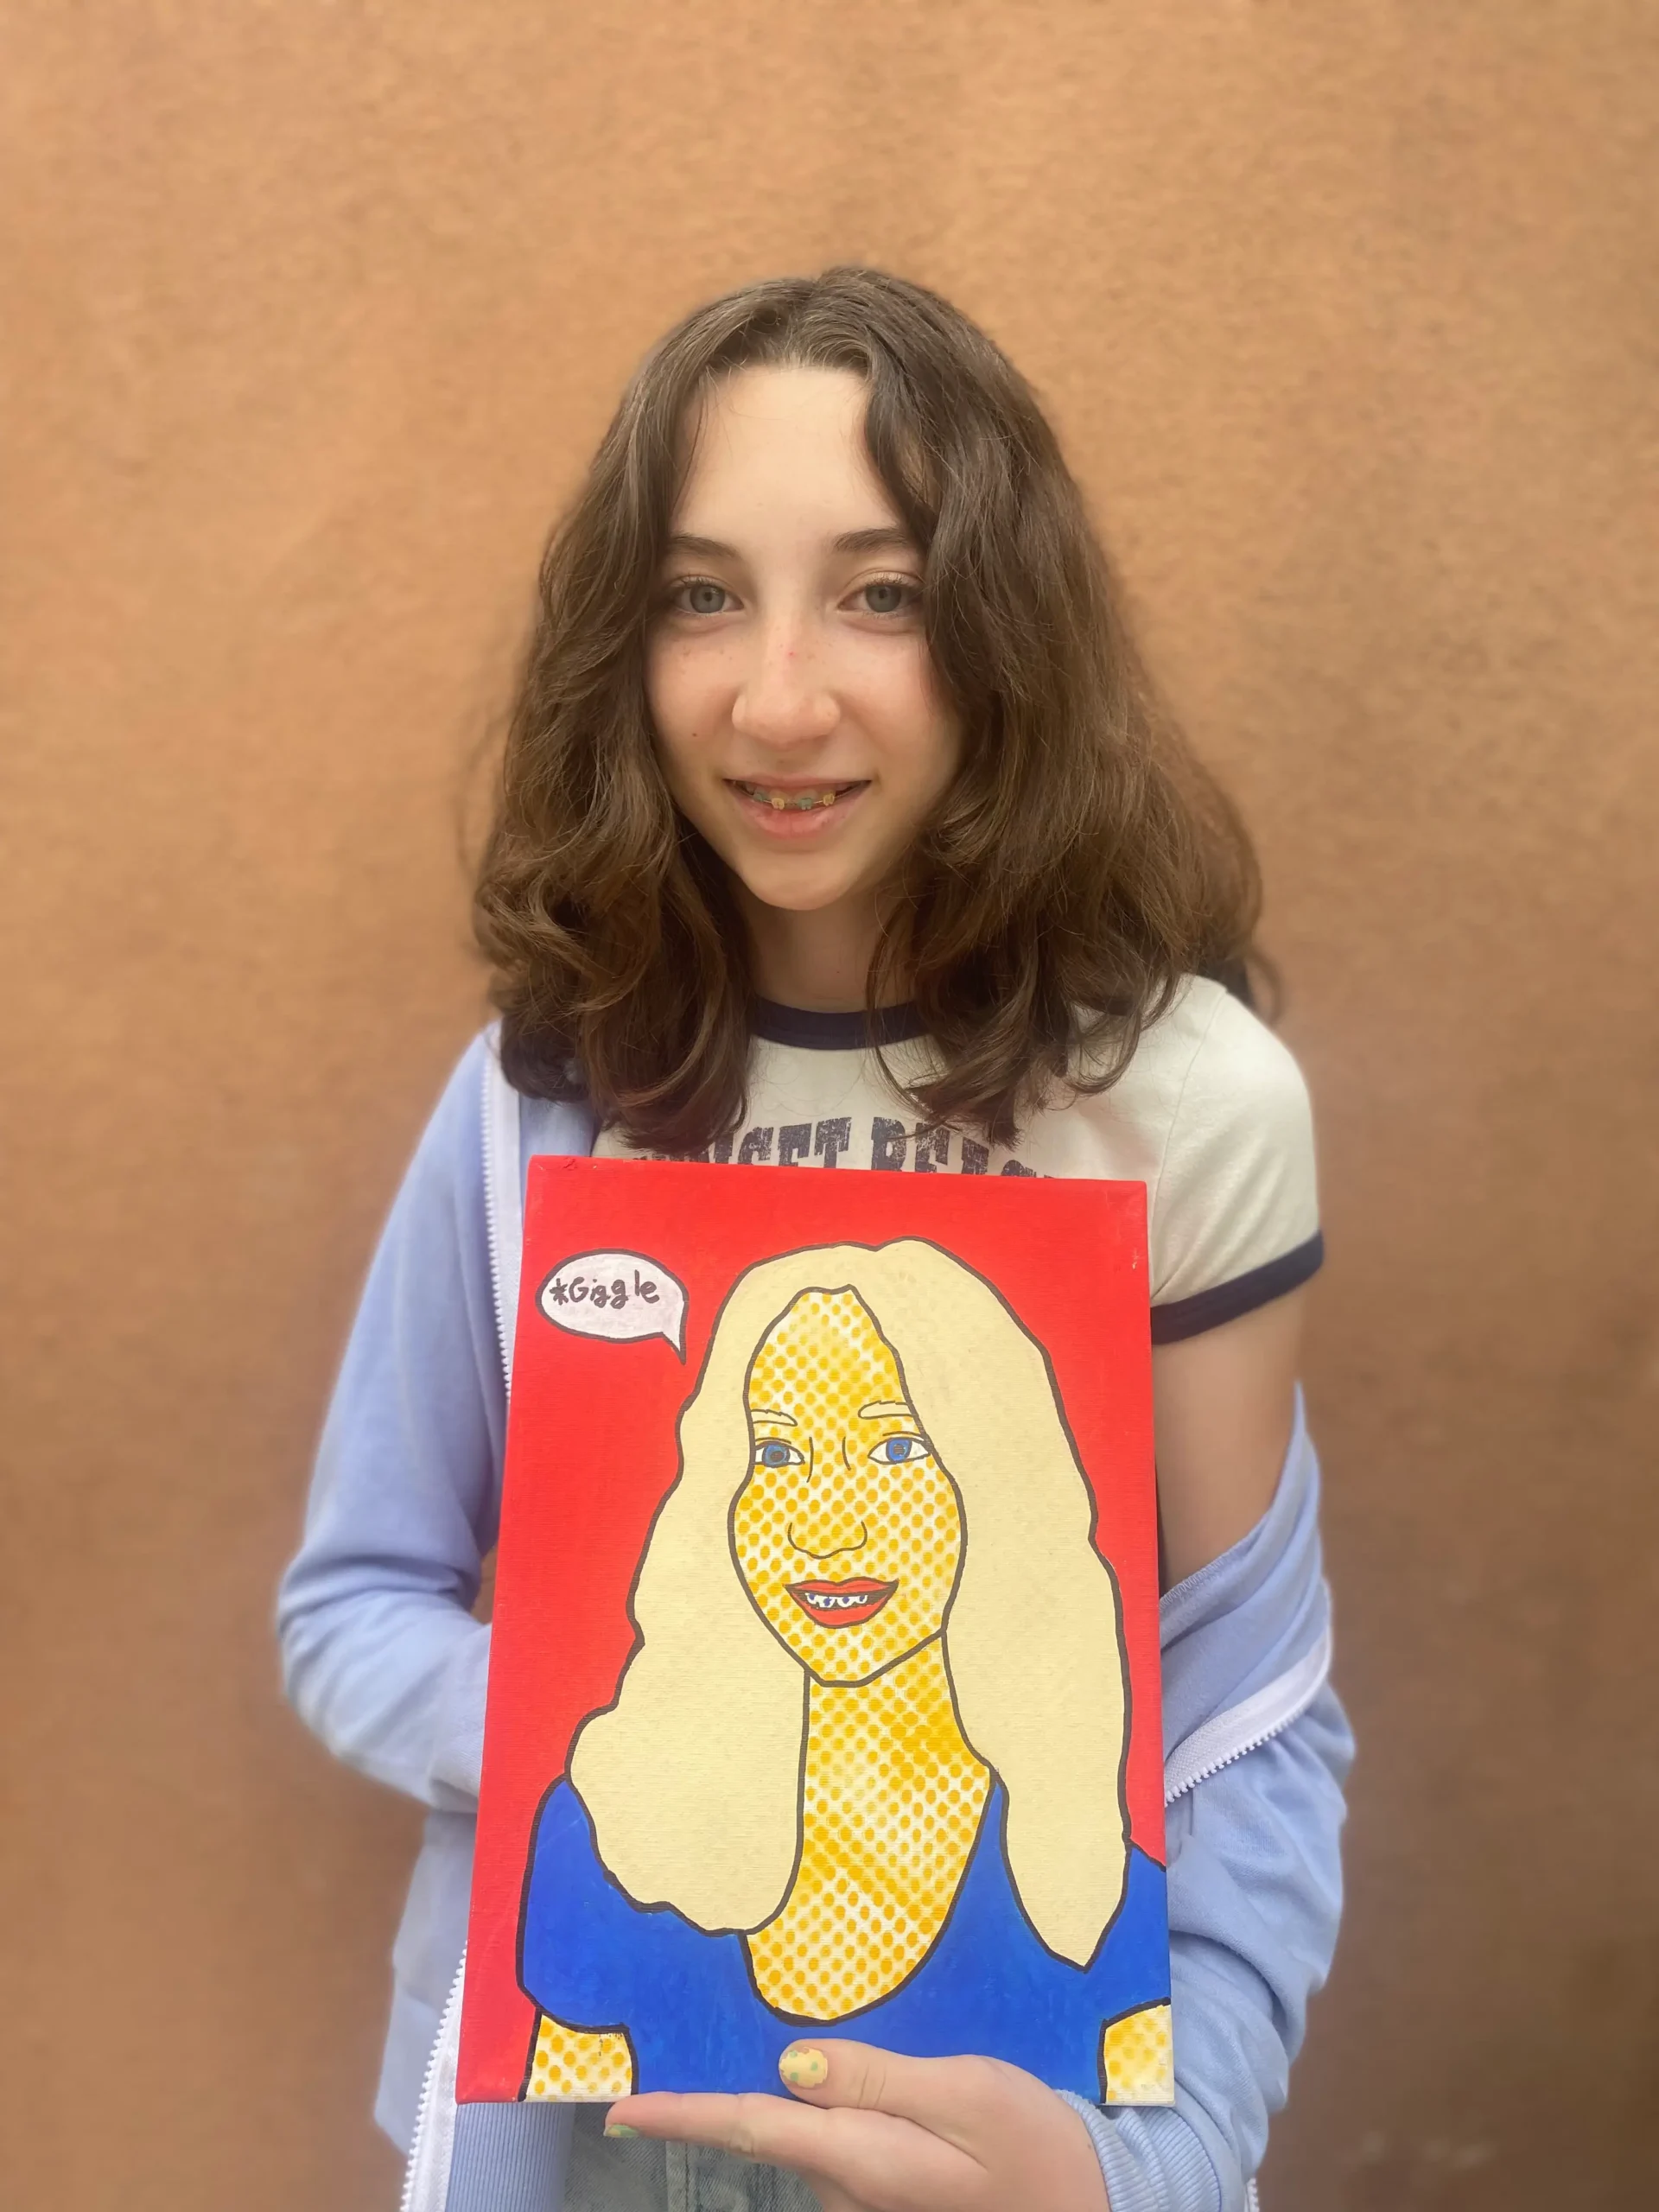 young girl artists holding self-portrait artwork in cool style